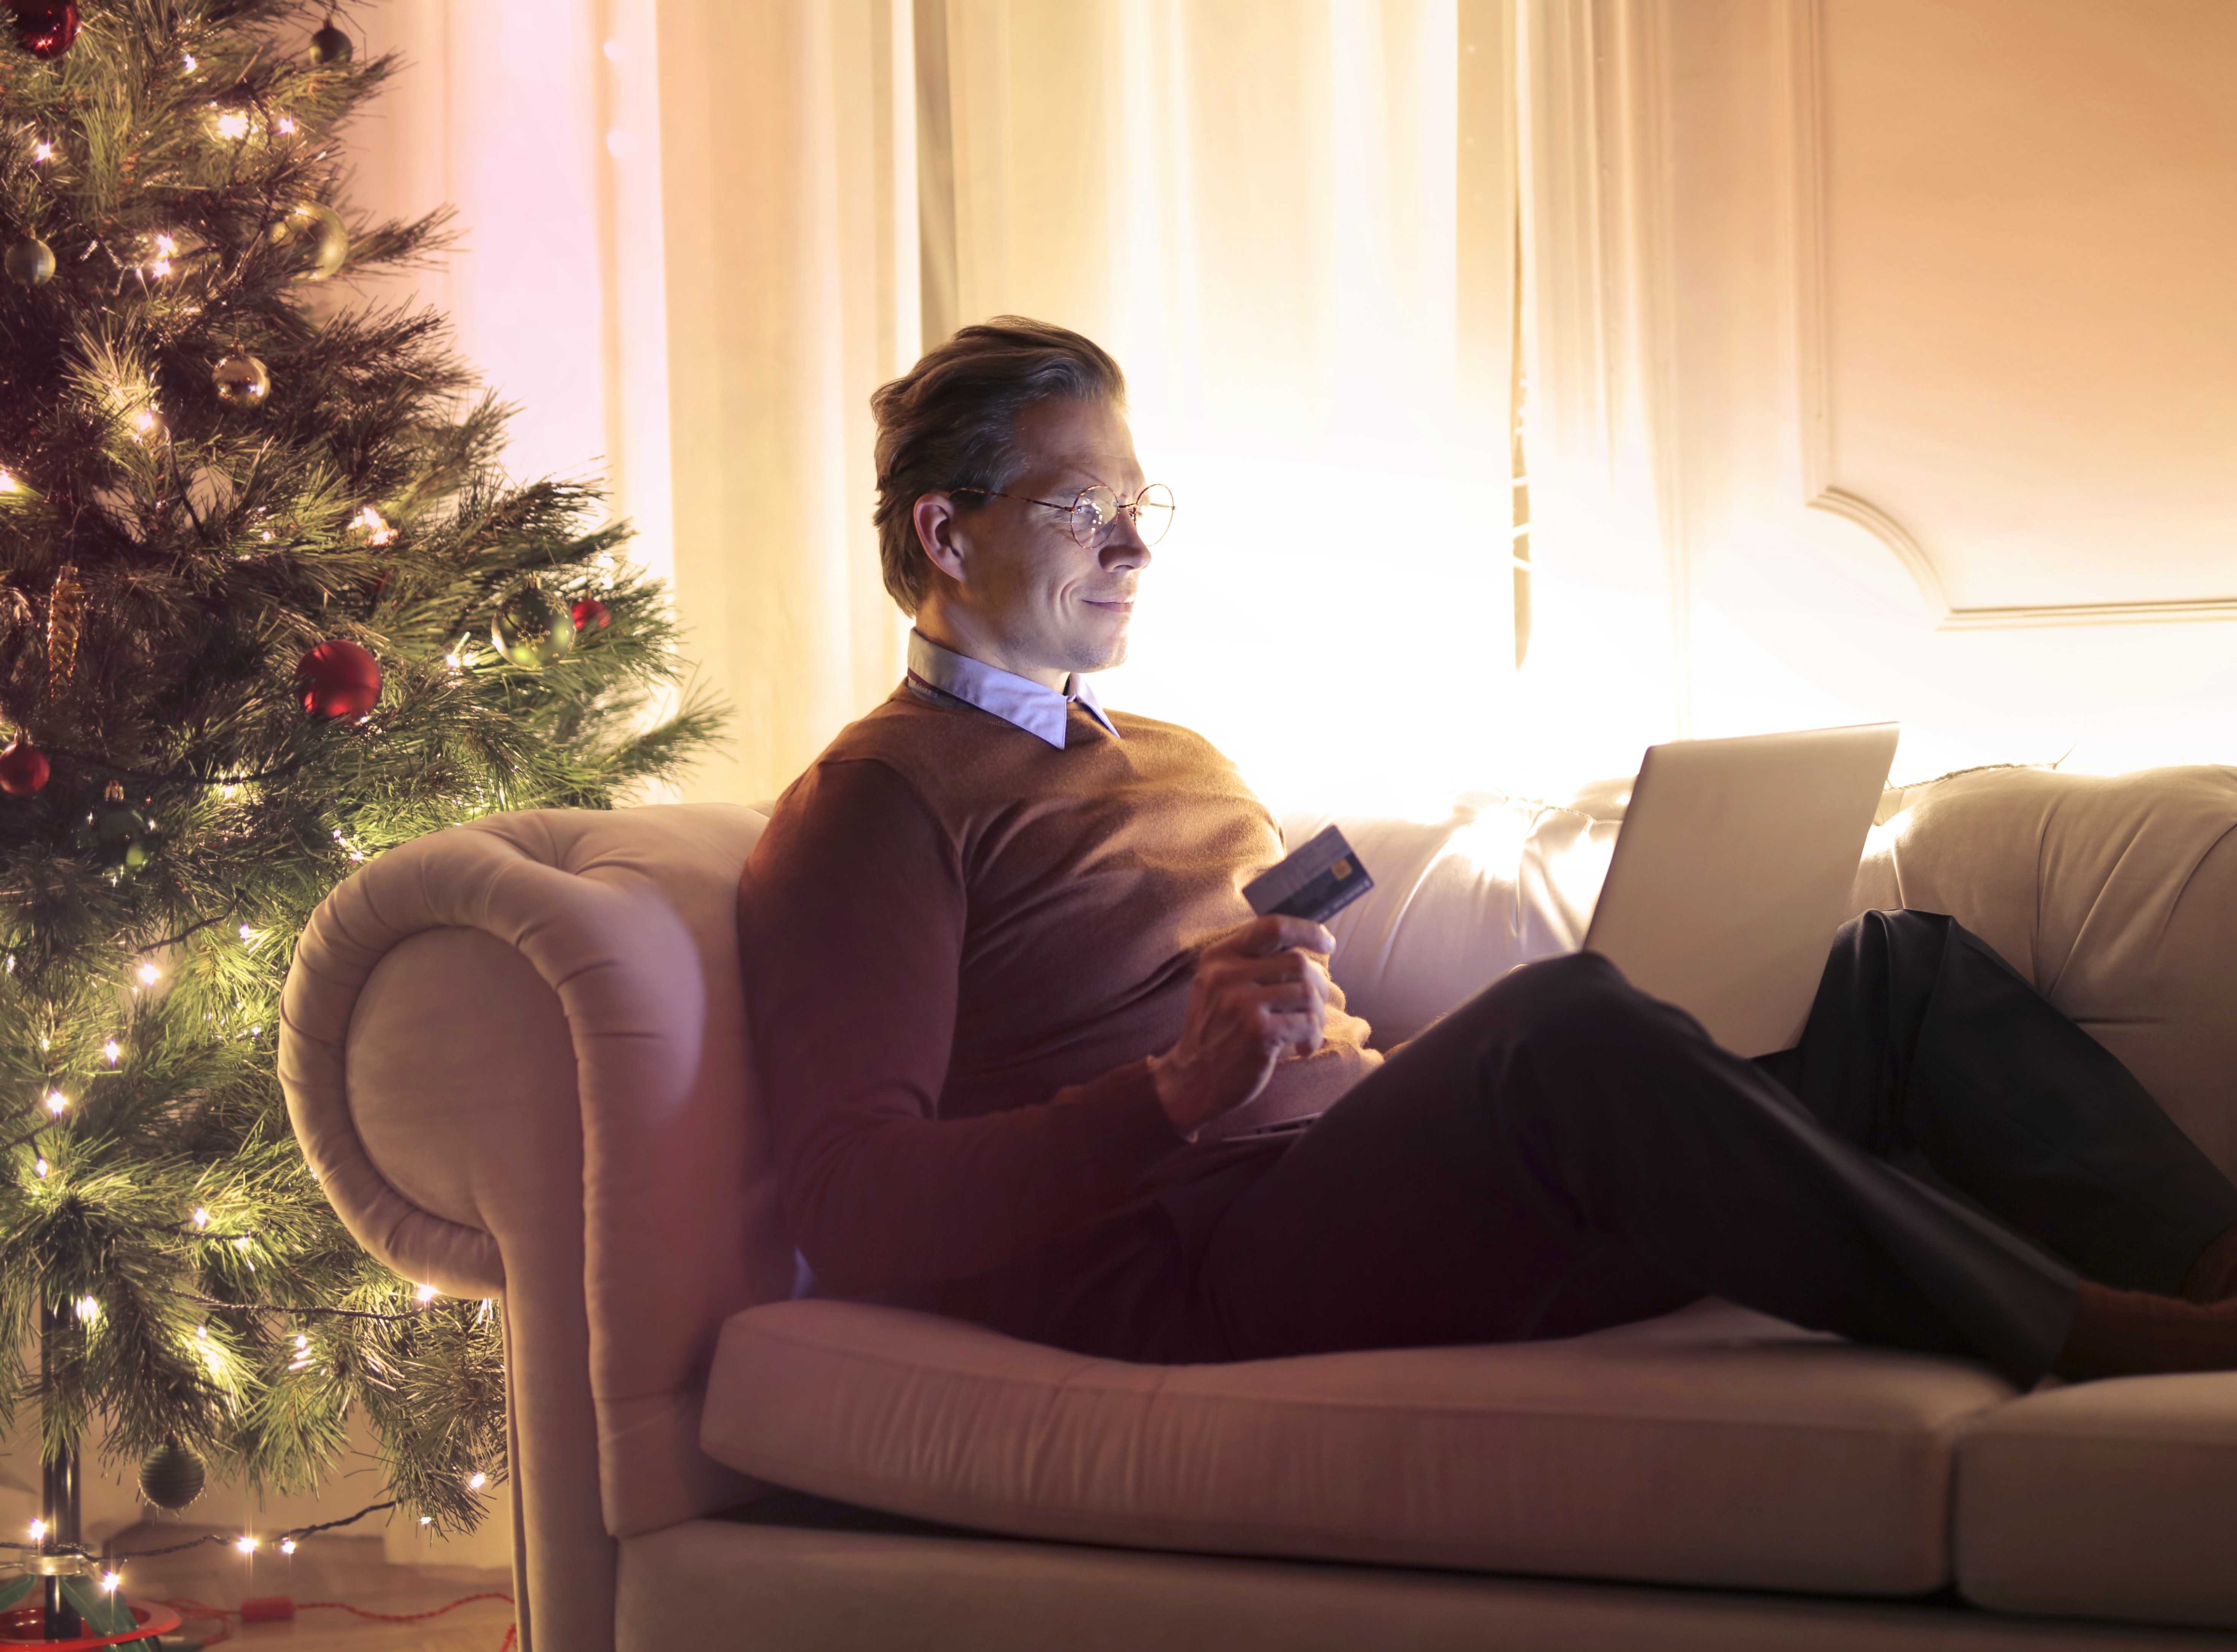 Man on Couch with Christmas Tree Lit in Background Holding Credit Card While on Laptop